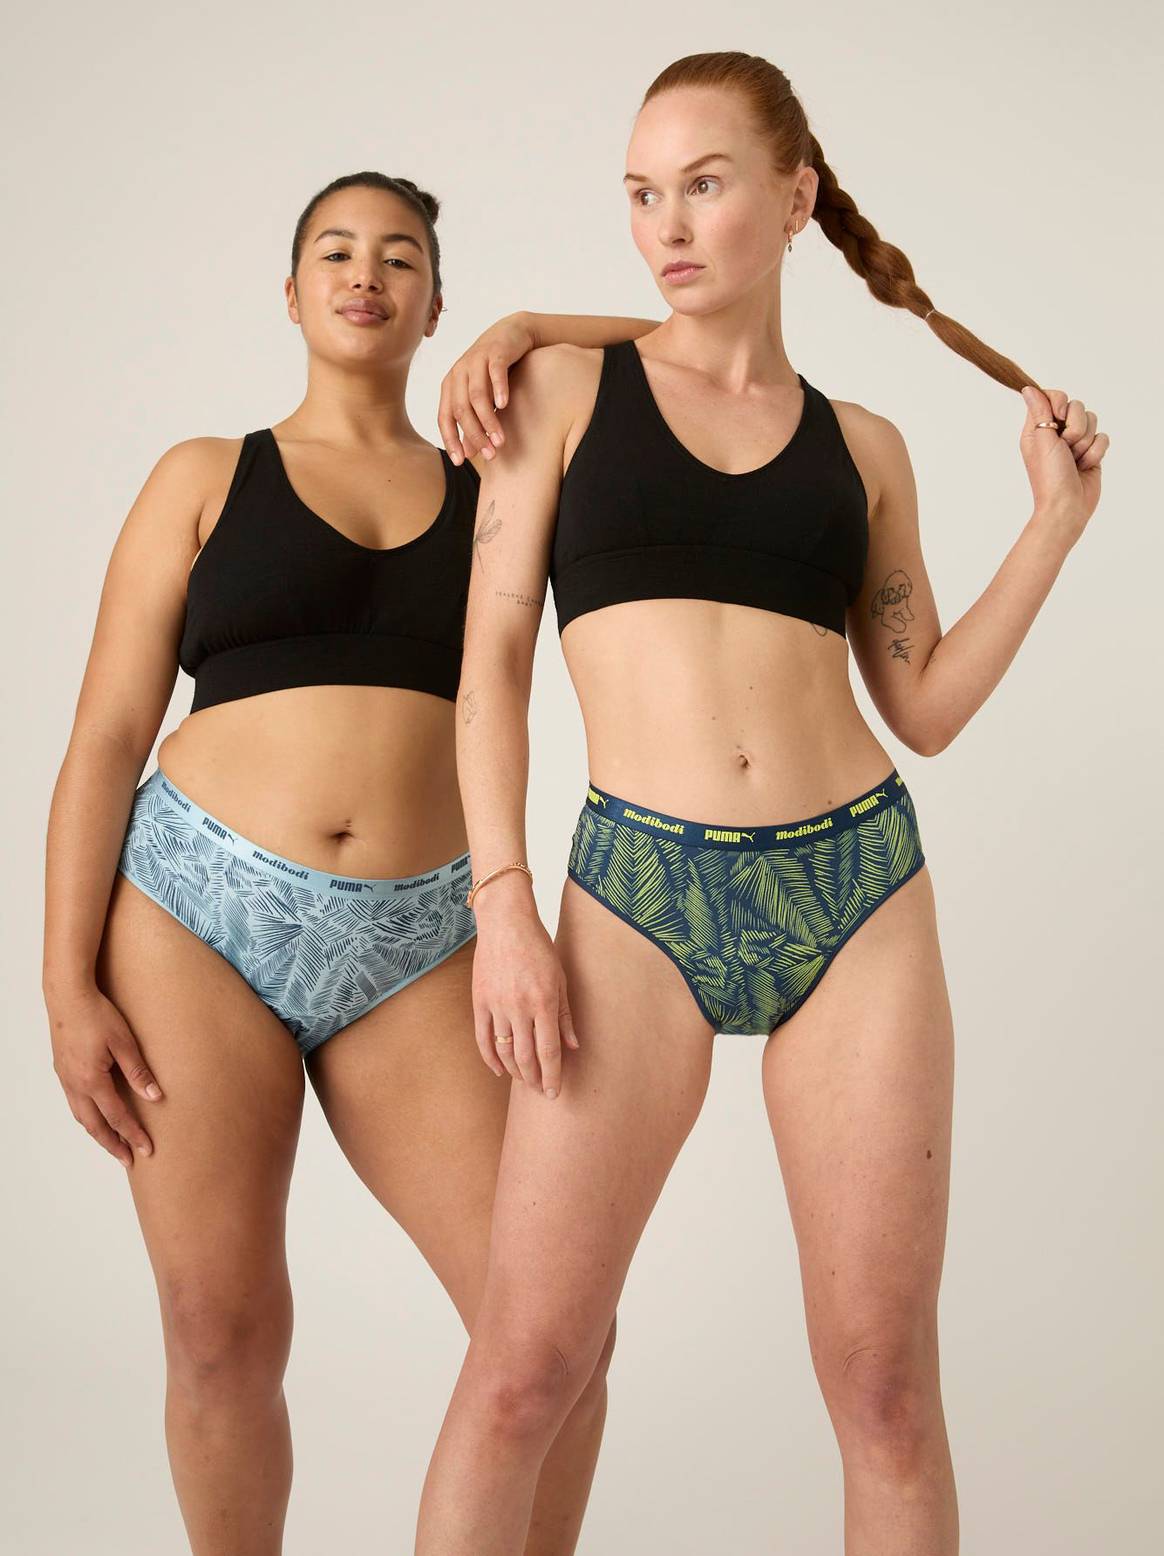 Modibodi launches leakproof swimwear made from recycled material